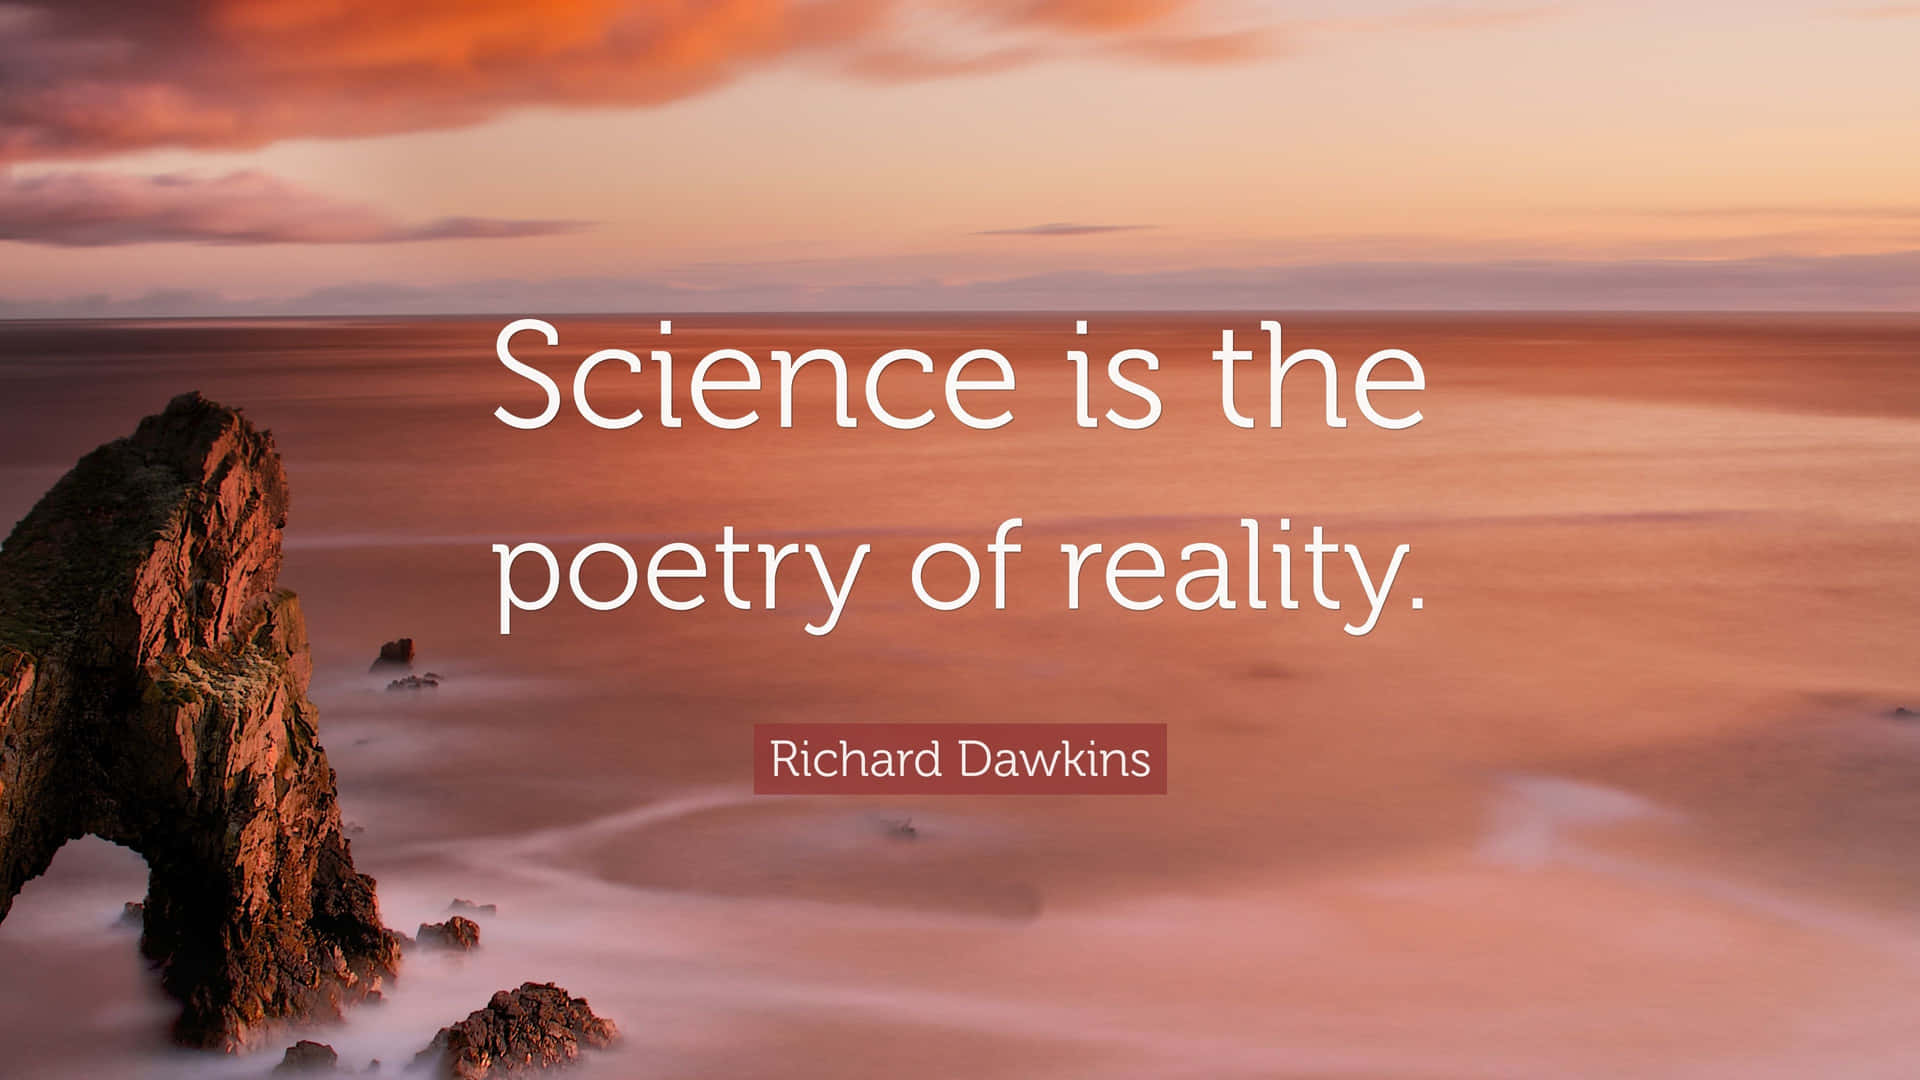 Science Poetryof Reality Quote Wallpaper